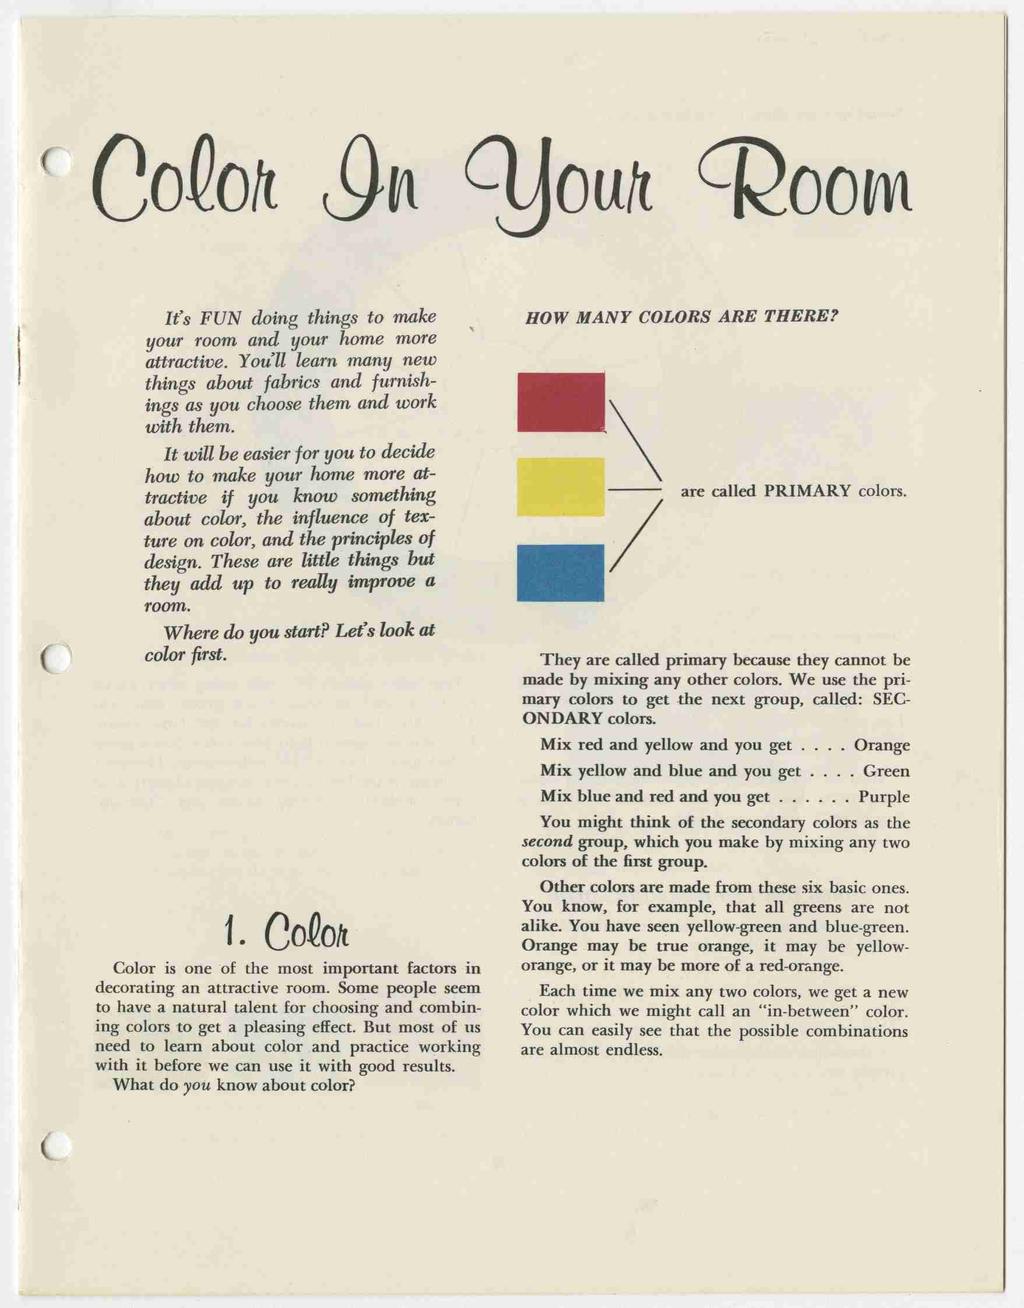 Colon 9m out (Econ It s FUN doing things to make your room and your home more attractive. You ll learn many new things about fabrics and furnish ings as you choose them and work with them.